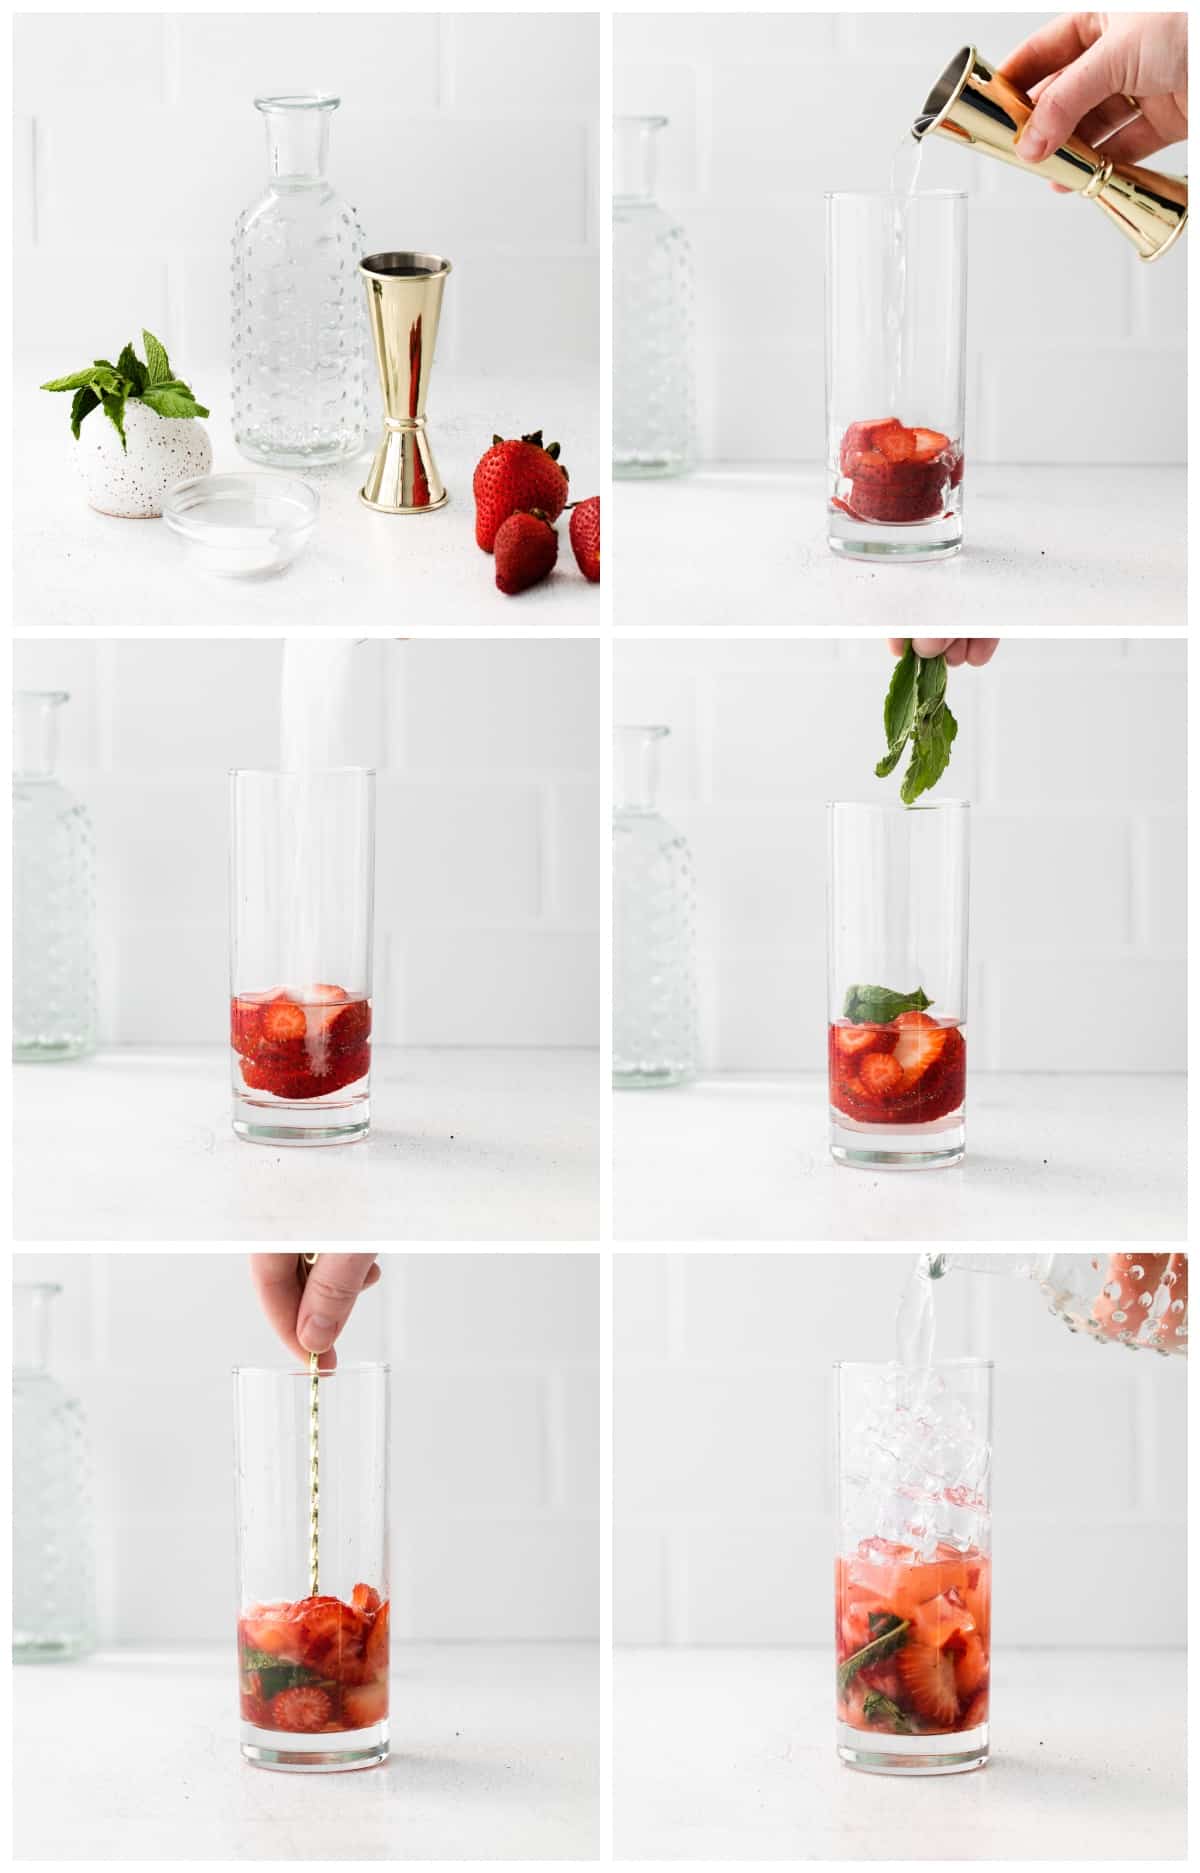 step by step photos for how to make strawberry mojito.